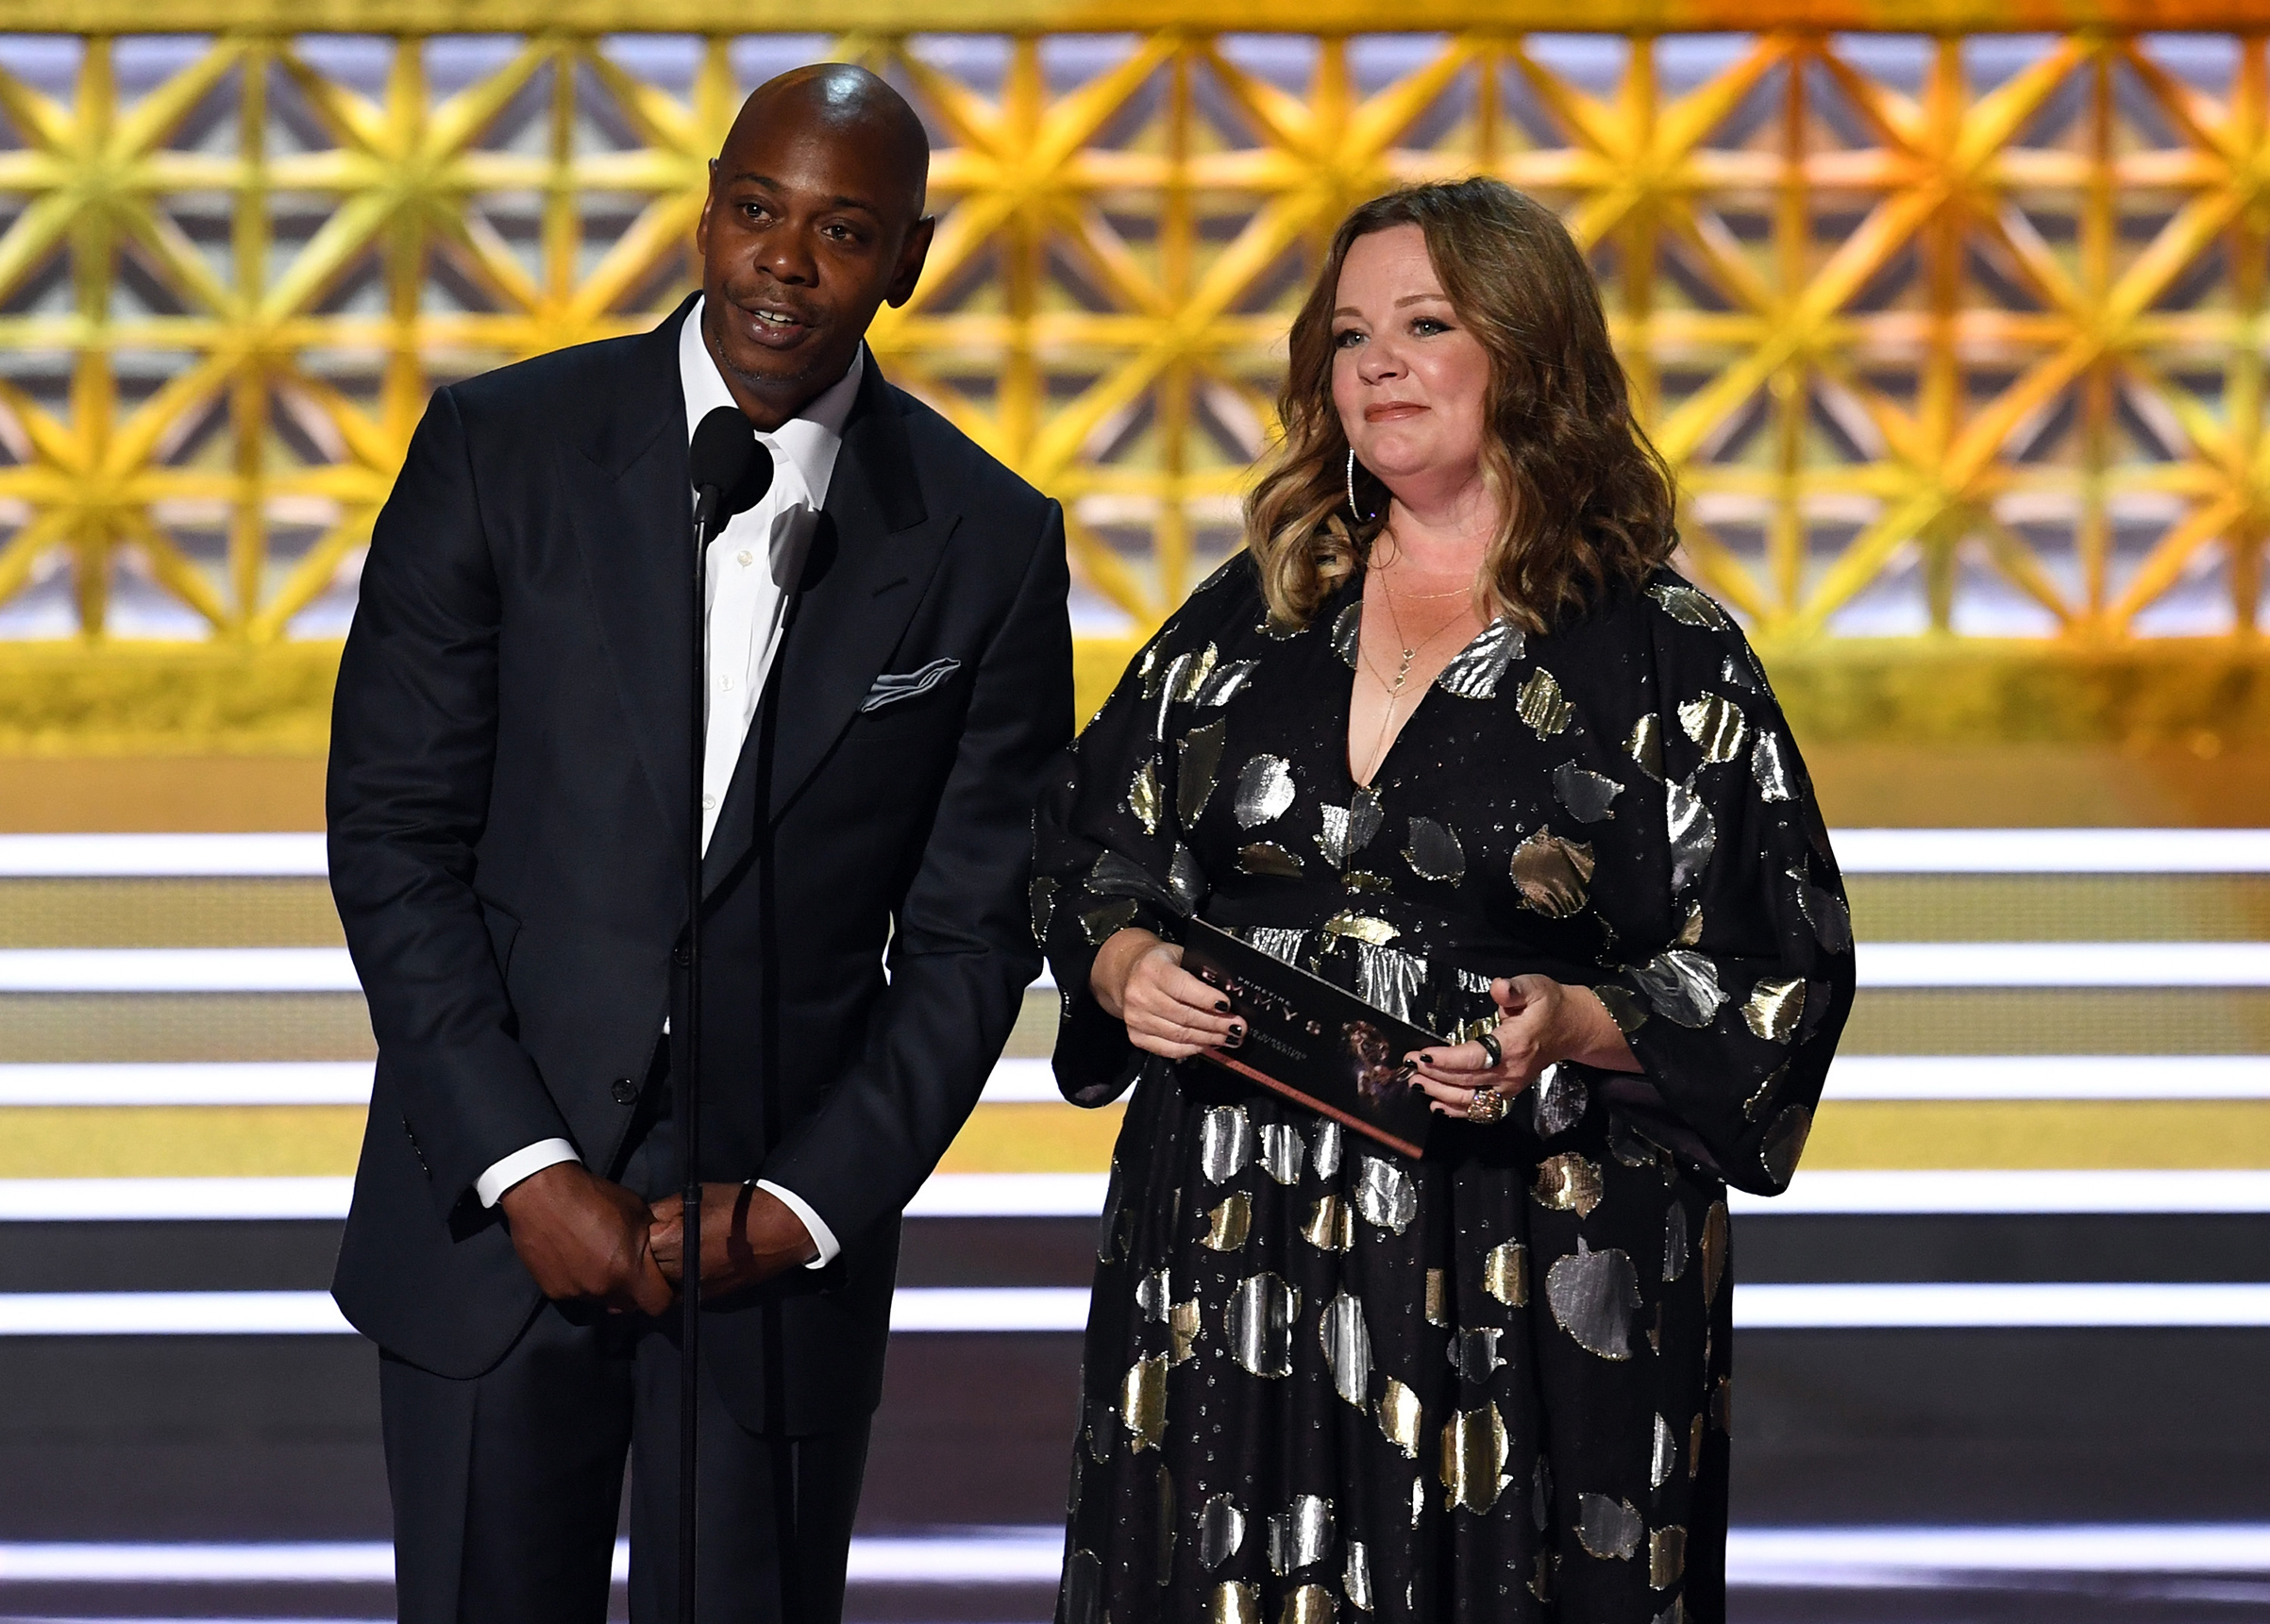 Comedian Dave Chappelle (L) and actor Melissa McCarthy speak onstage during the 69th Annual Primetime Emmy Awards at Microsoft Theater on Sept. 17, 2017 in Los Angeles. (Kevin Winter—Getty Images)